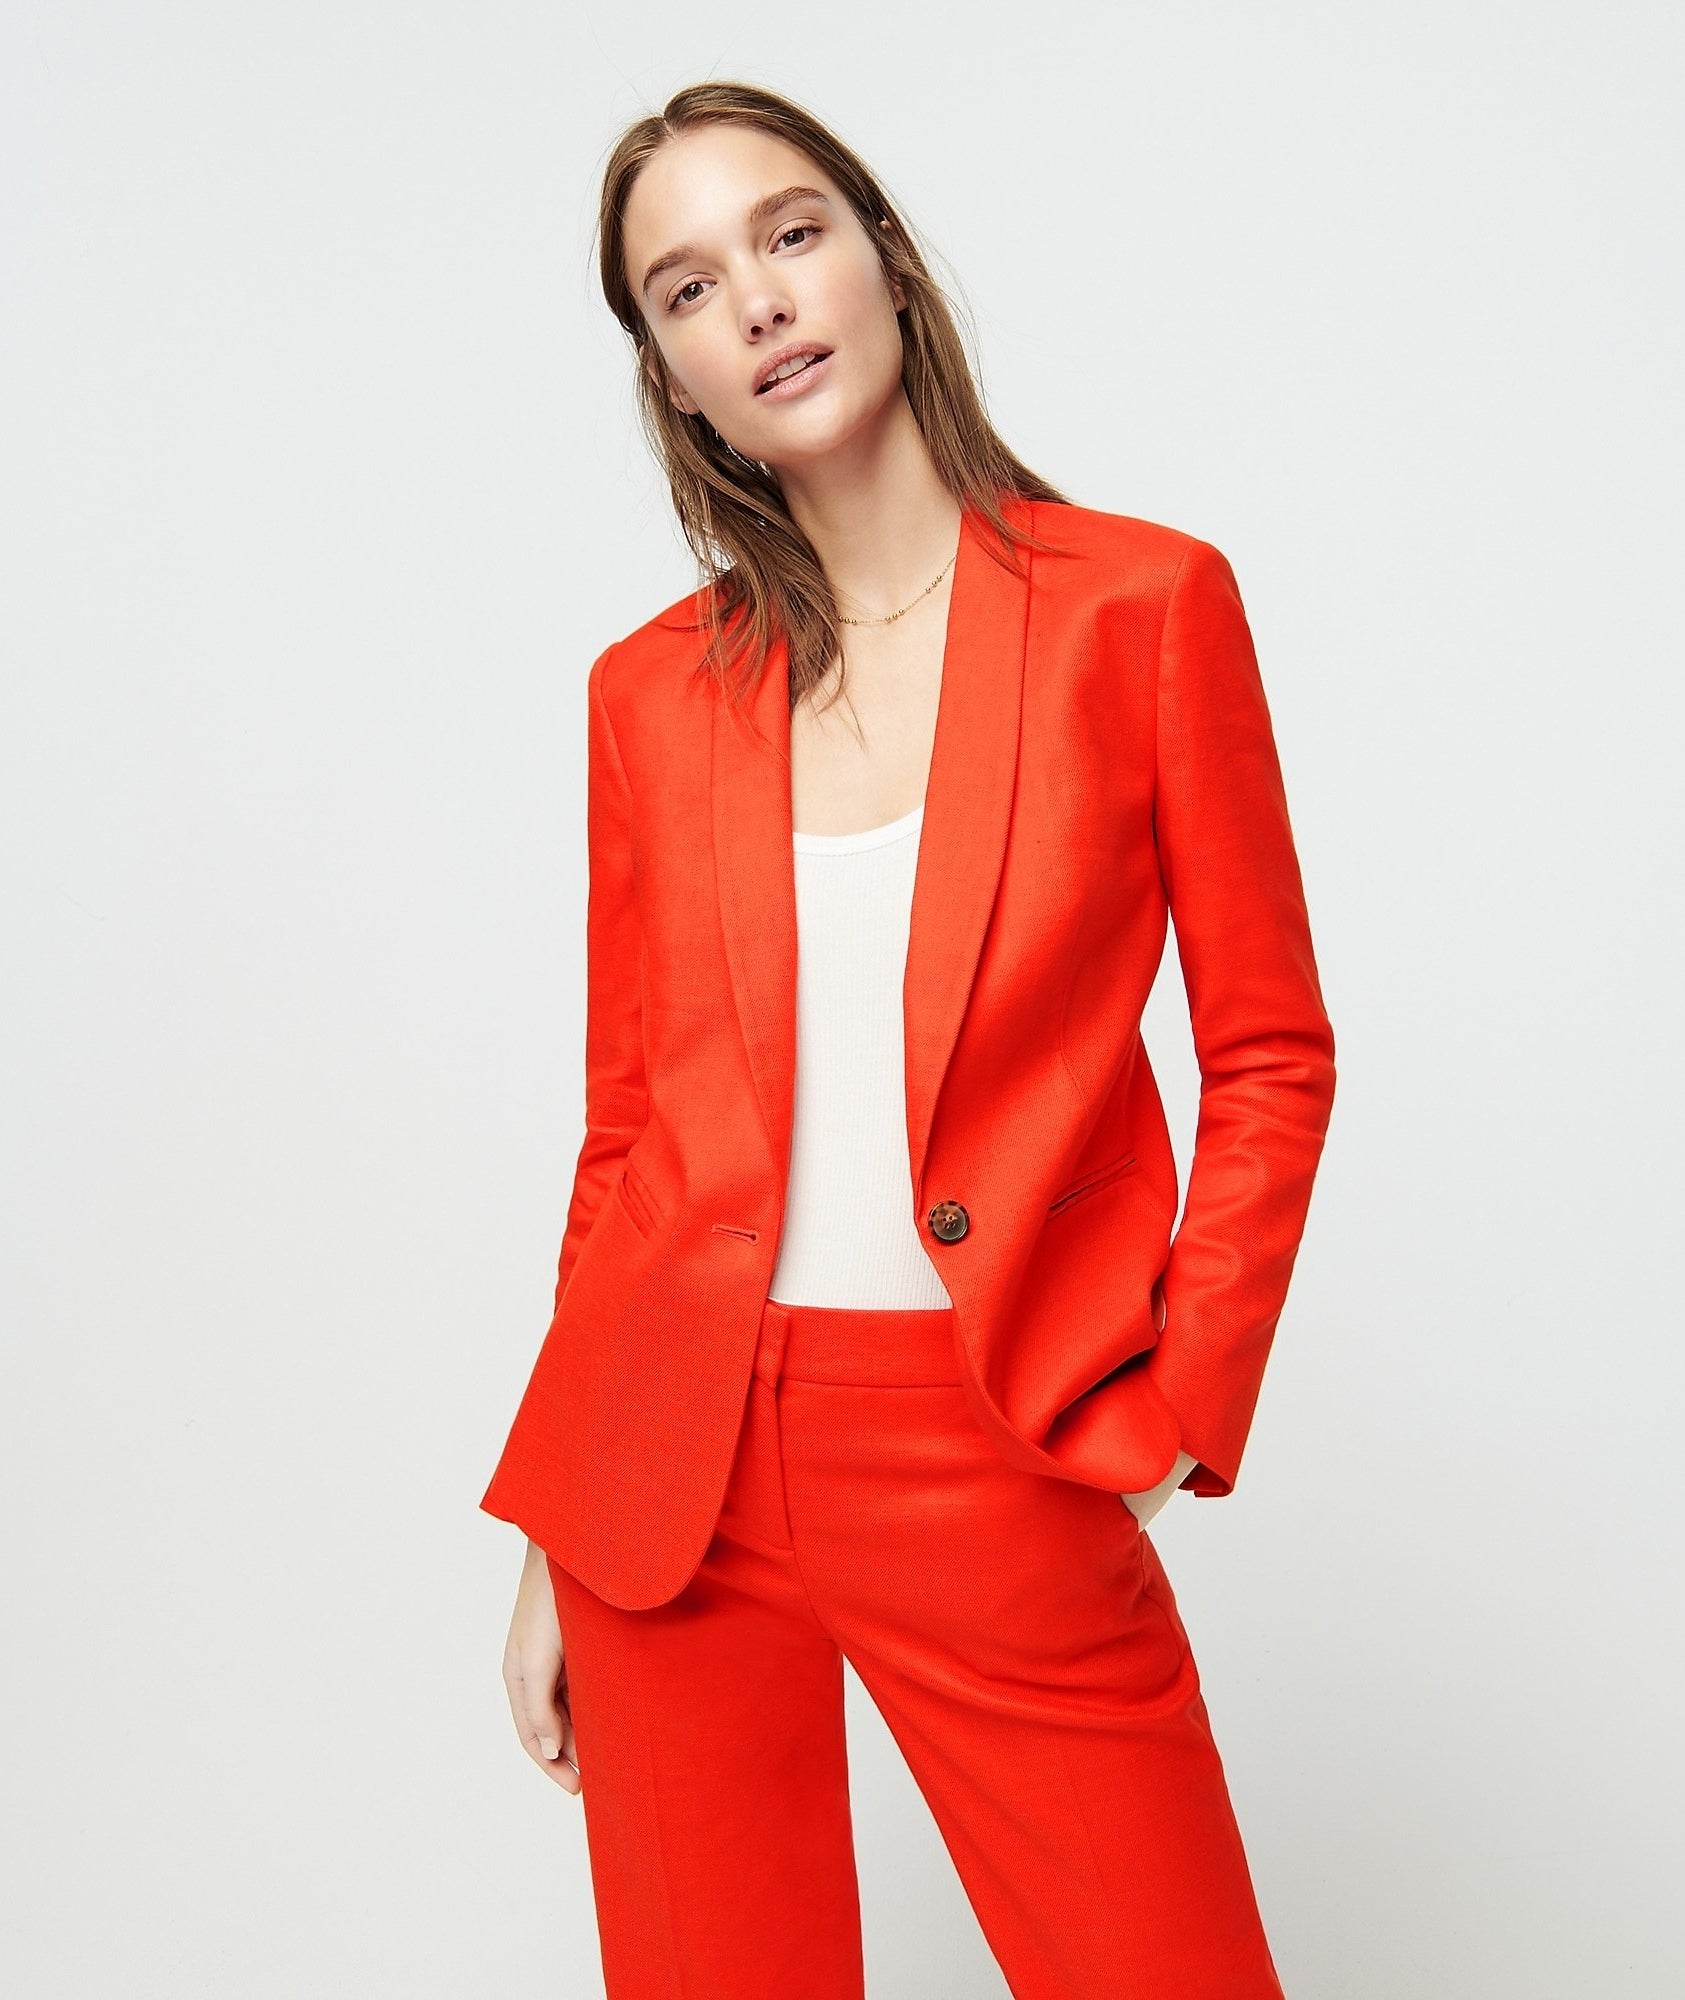 model in bright red single button blazer with matching pants